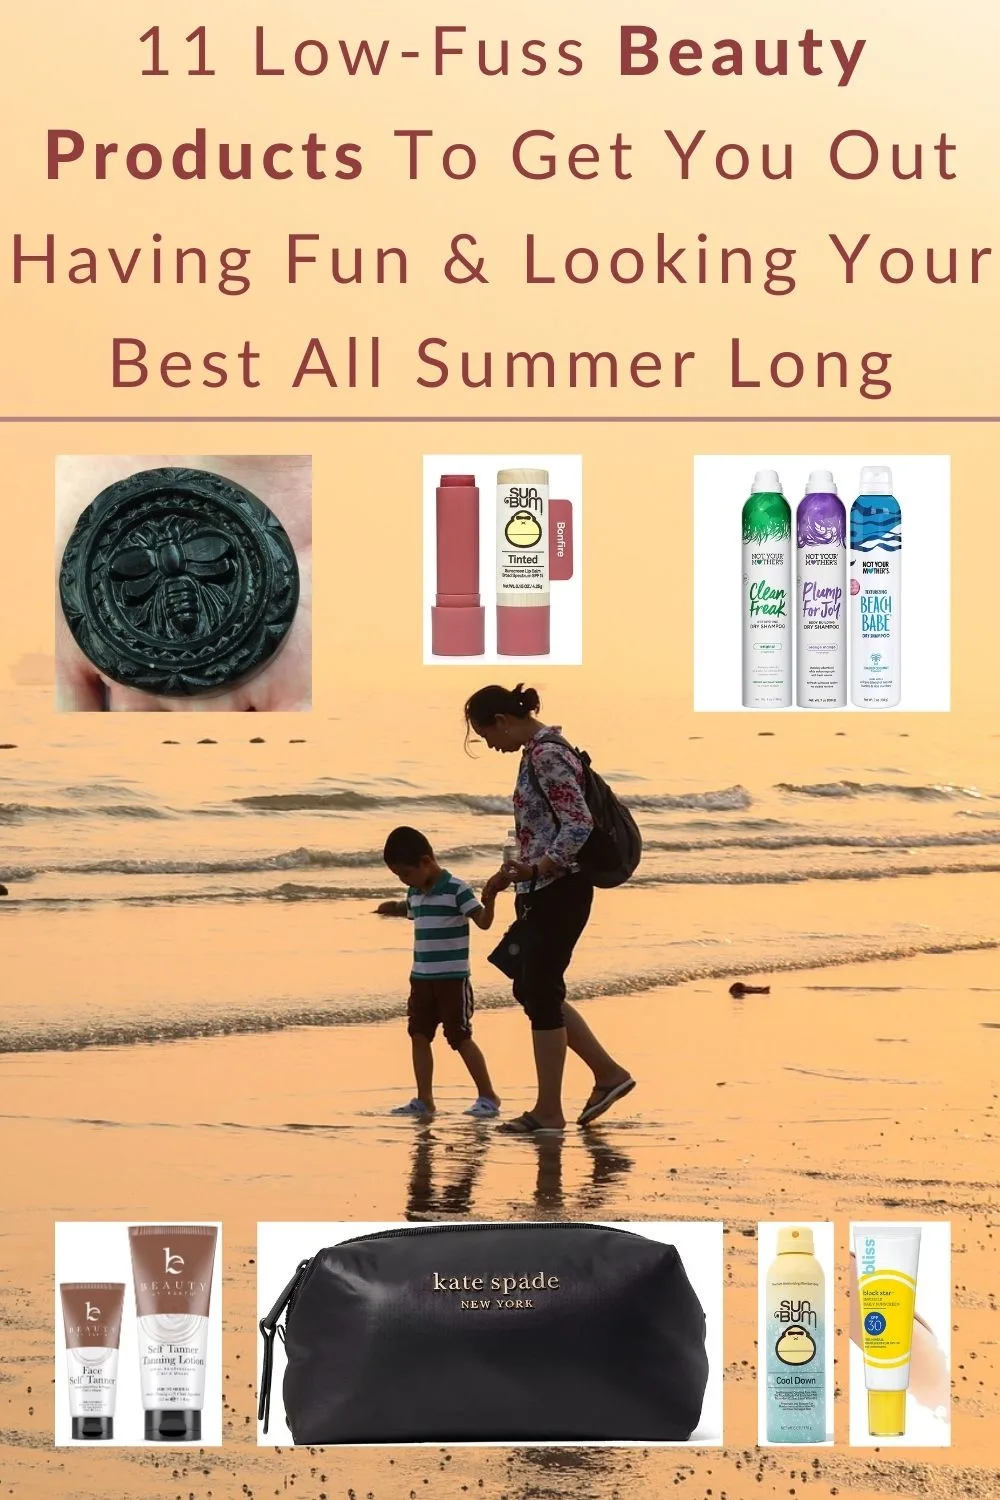 11 low-fuss summer beauty products to get you ooking your best and out in the sun, having fun with your family fast.